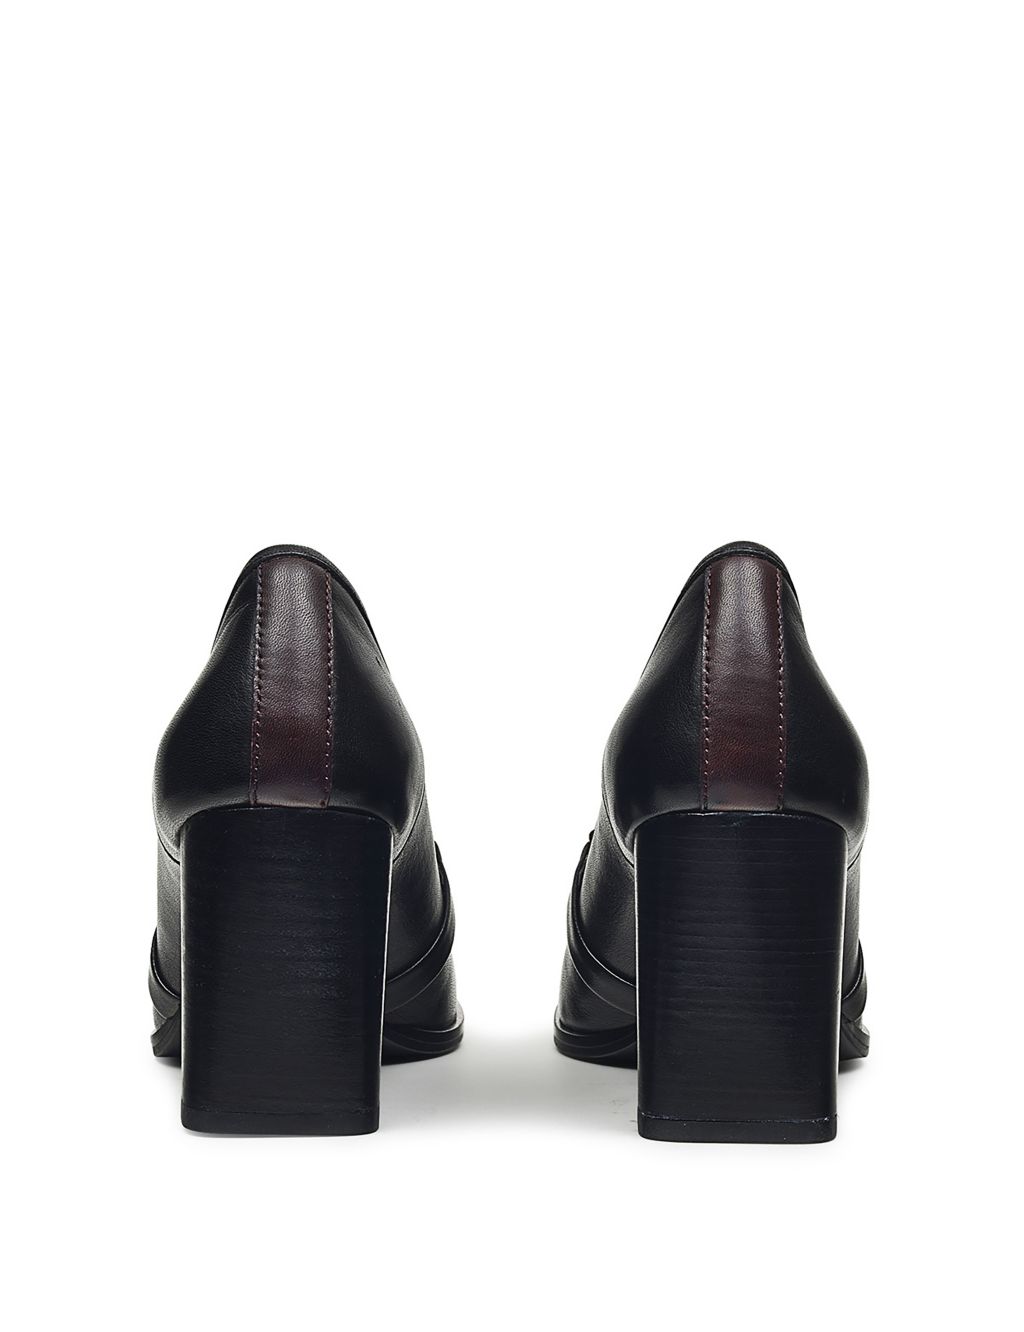 Leather Chunky Block Heel Loafers image 5